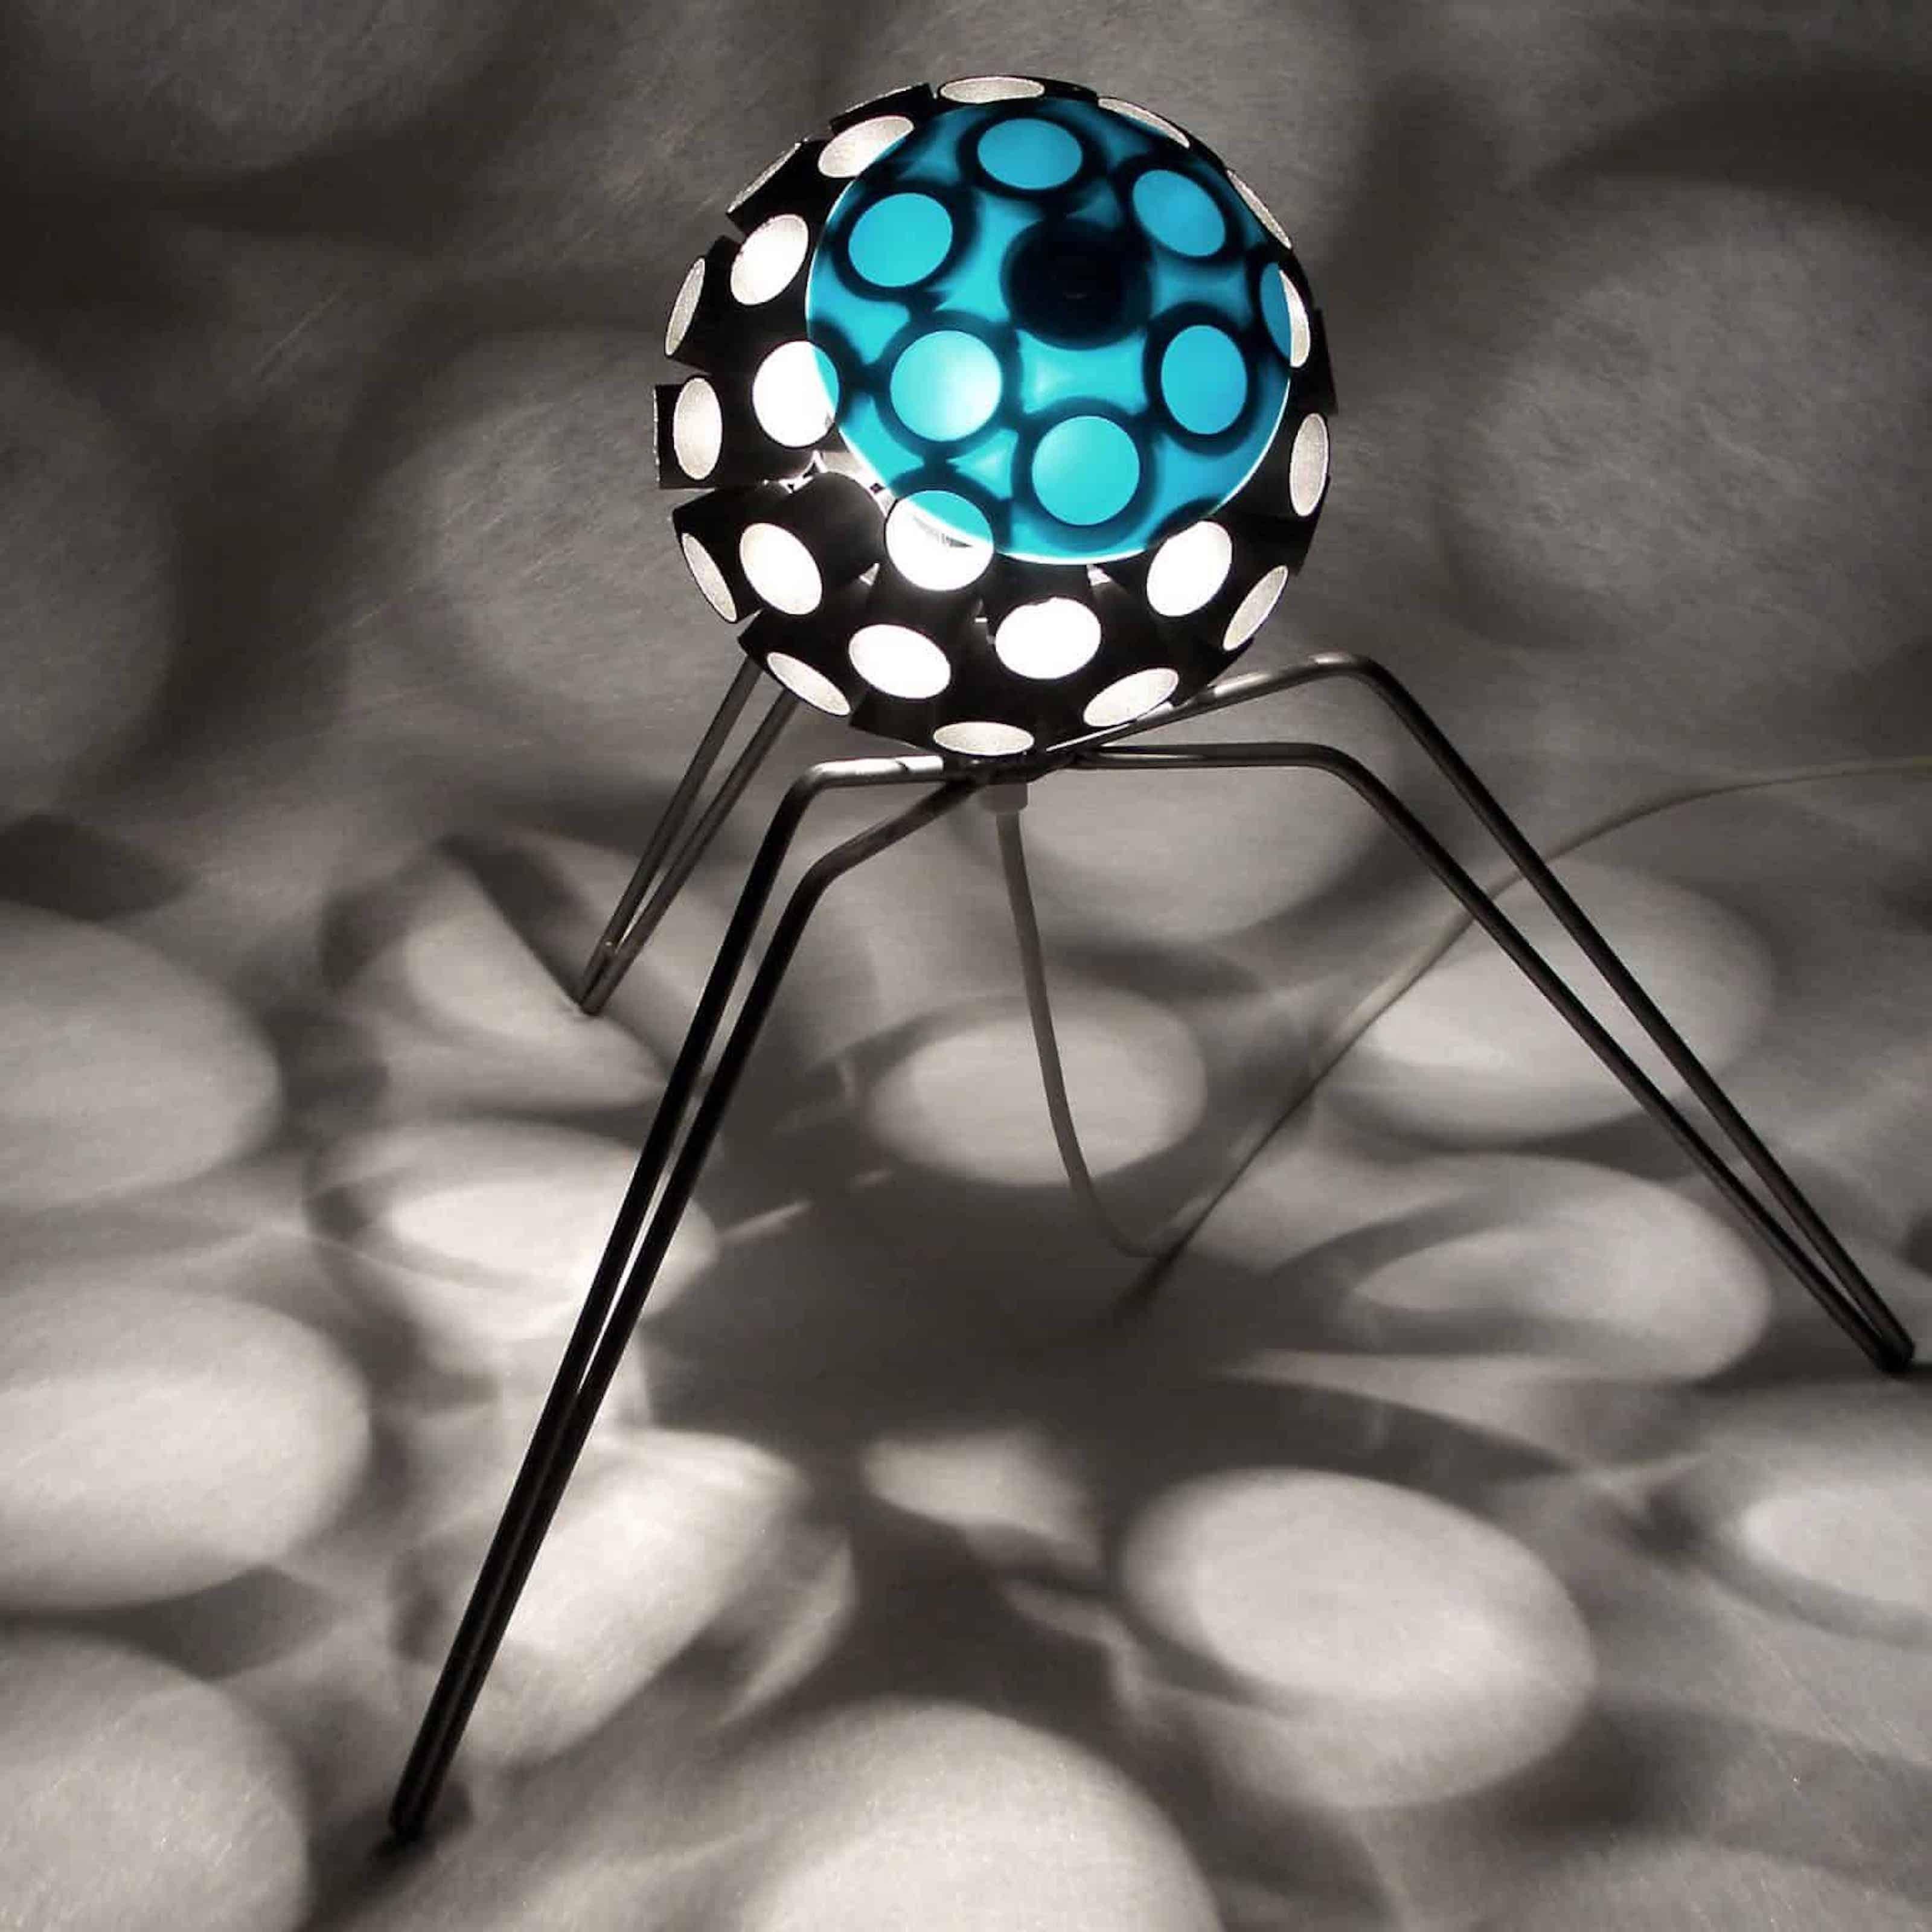  Interior Lamp - "Virus" with shadow projection - unique contemporary - small - Mixed Media Art by Stefan Traloc